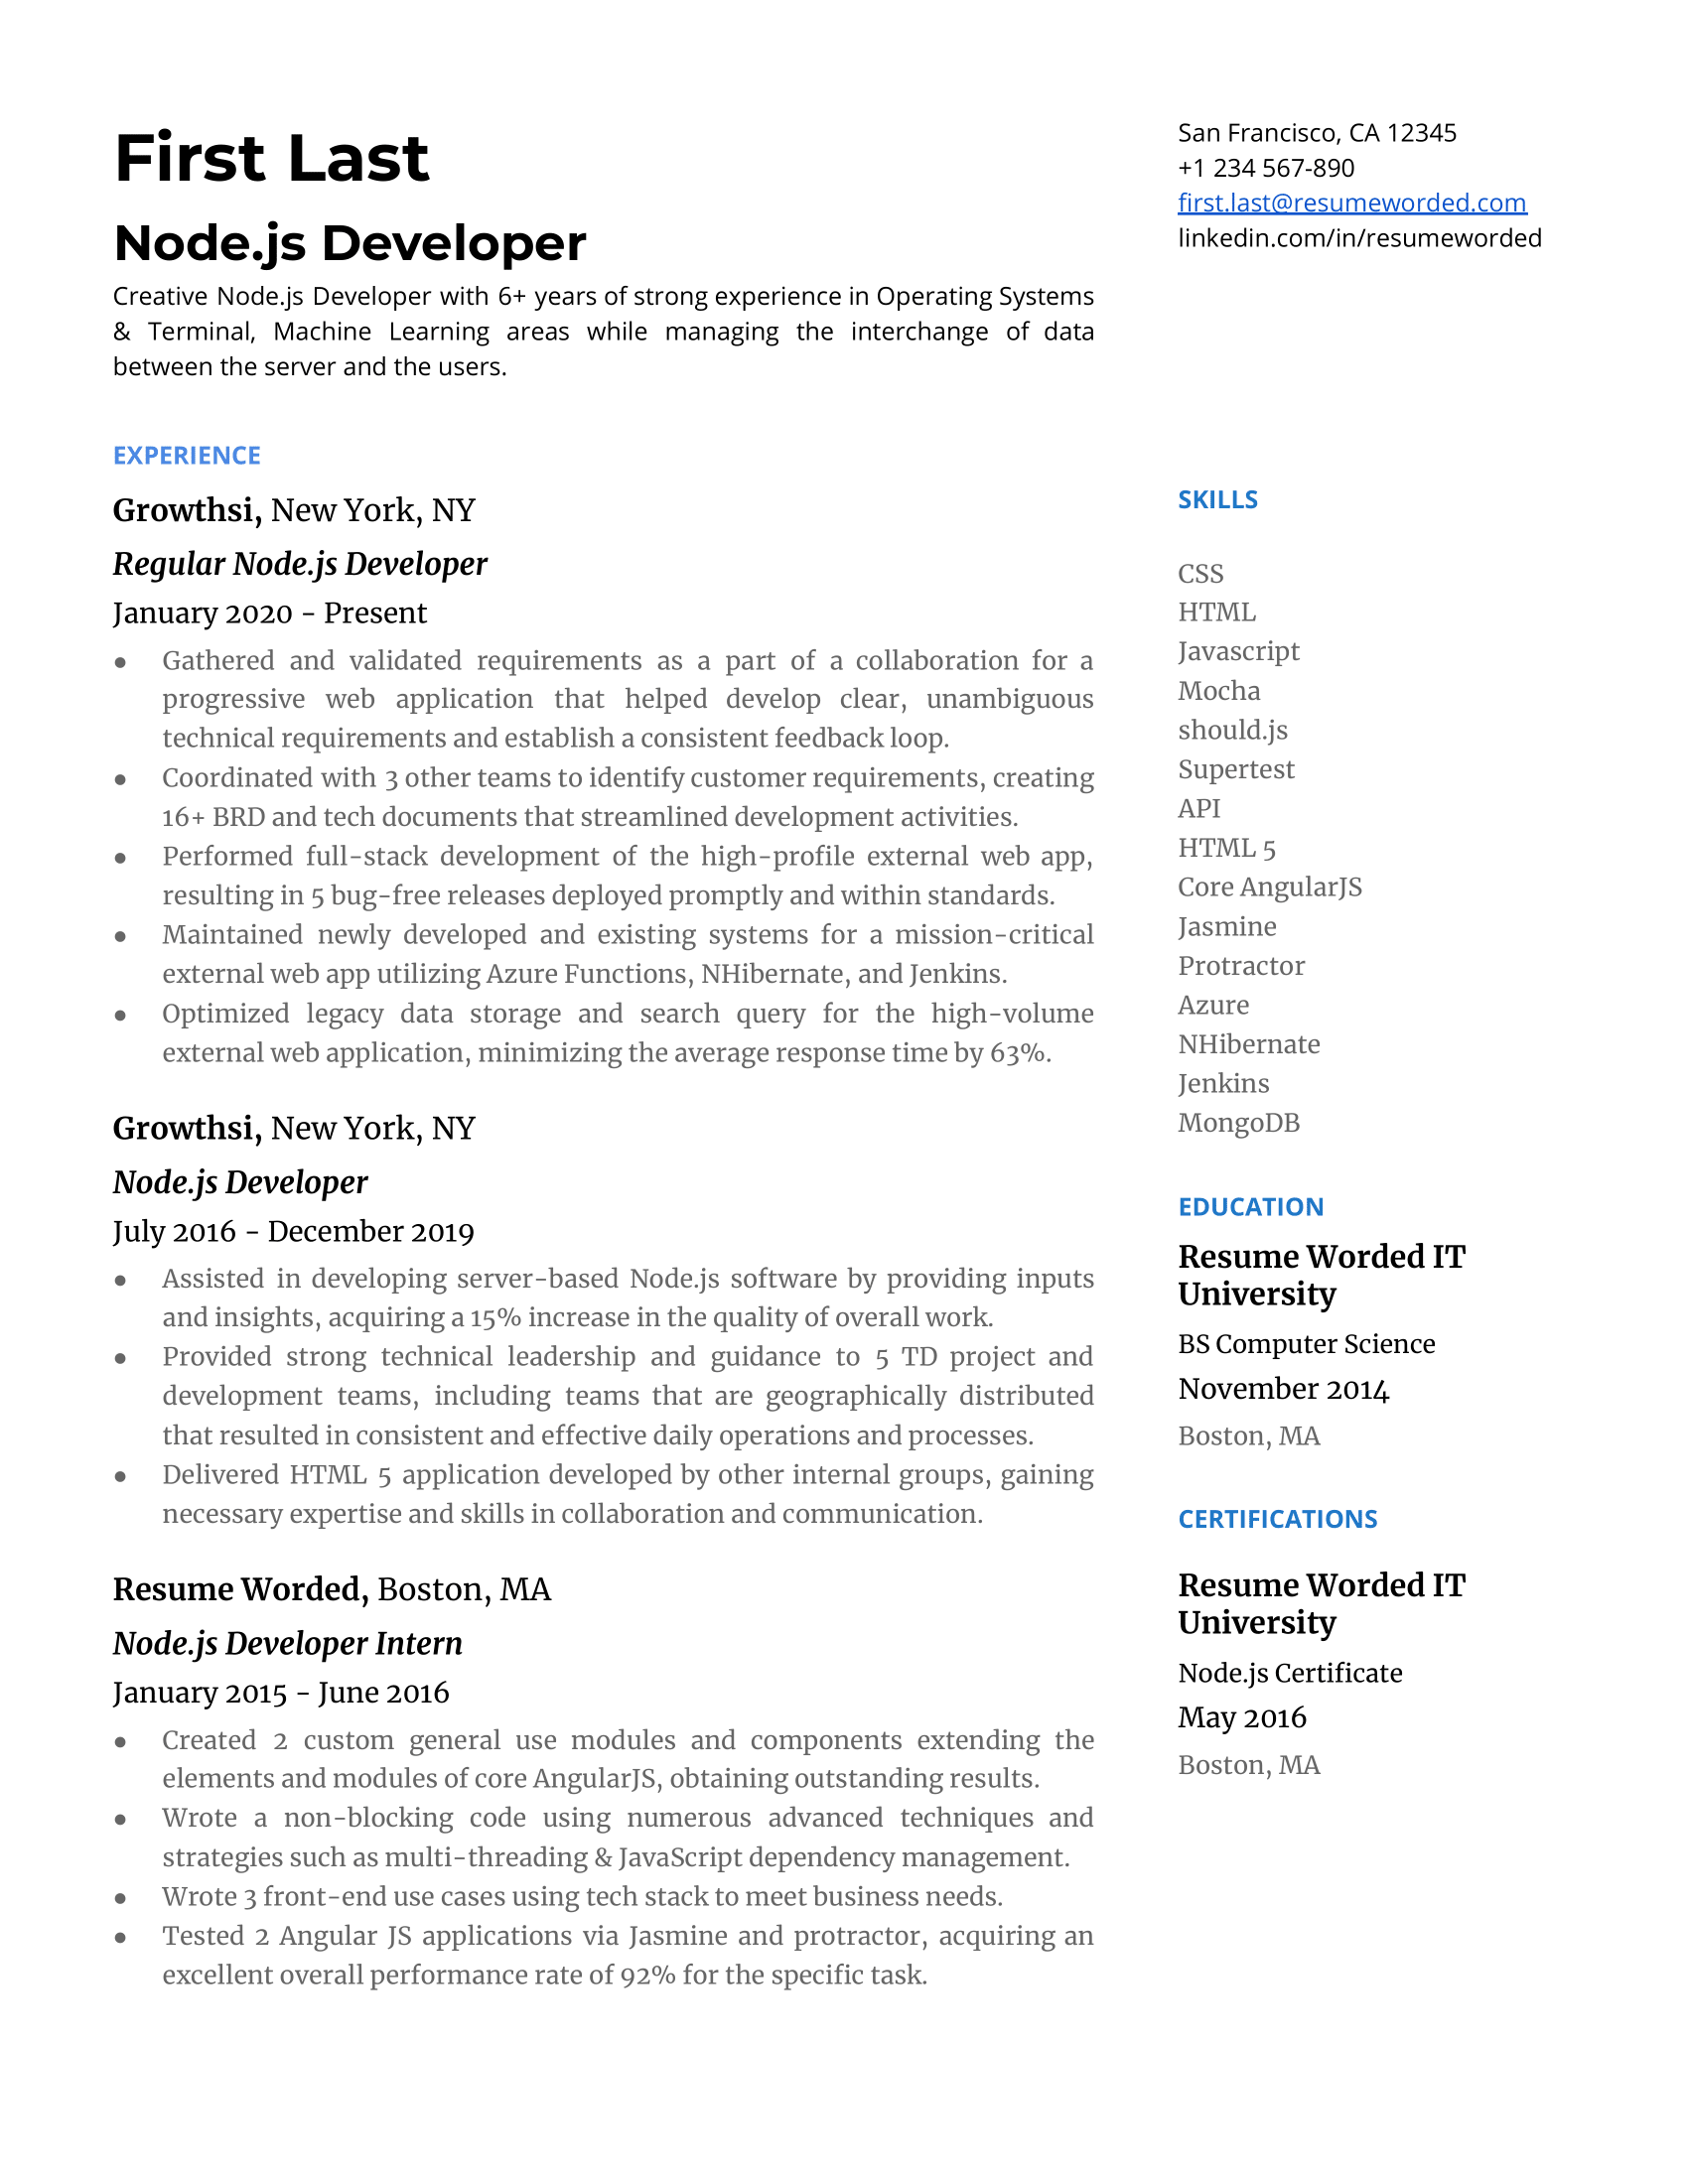 Node.js developer resume with hard skills section and strong action verbs
